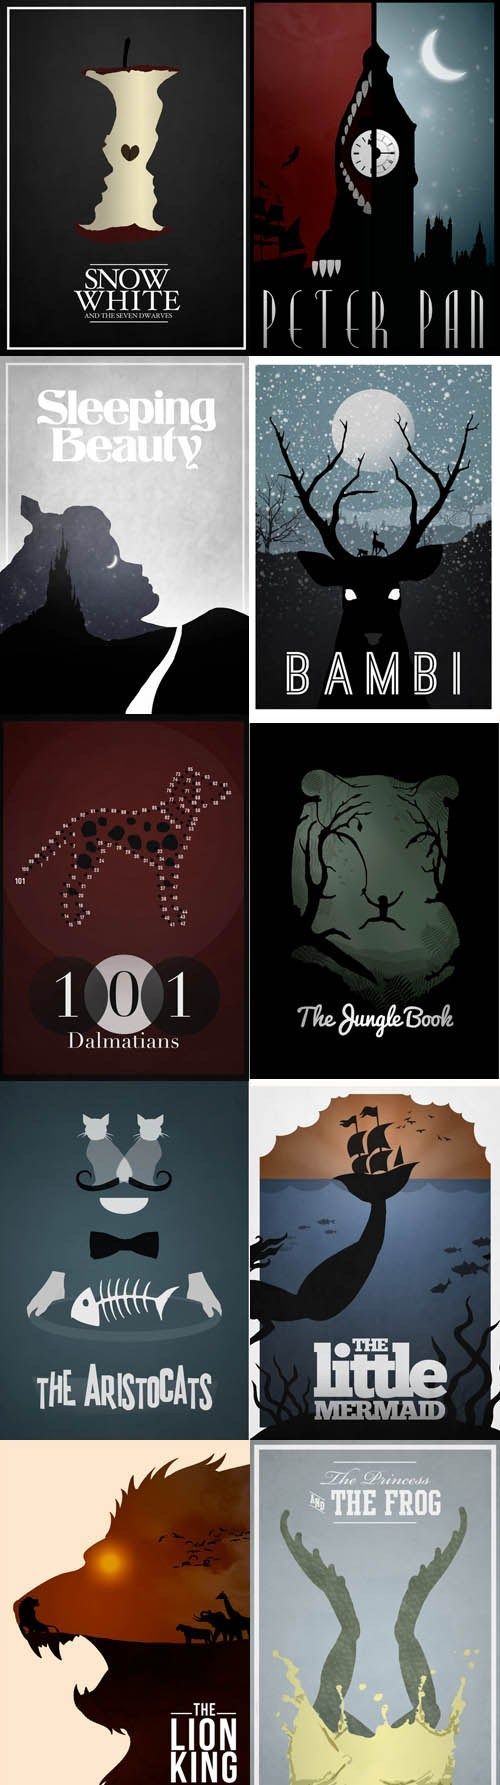 Minimalist Disney Movie Posters – I think Jungle Book has the best one but theyr